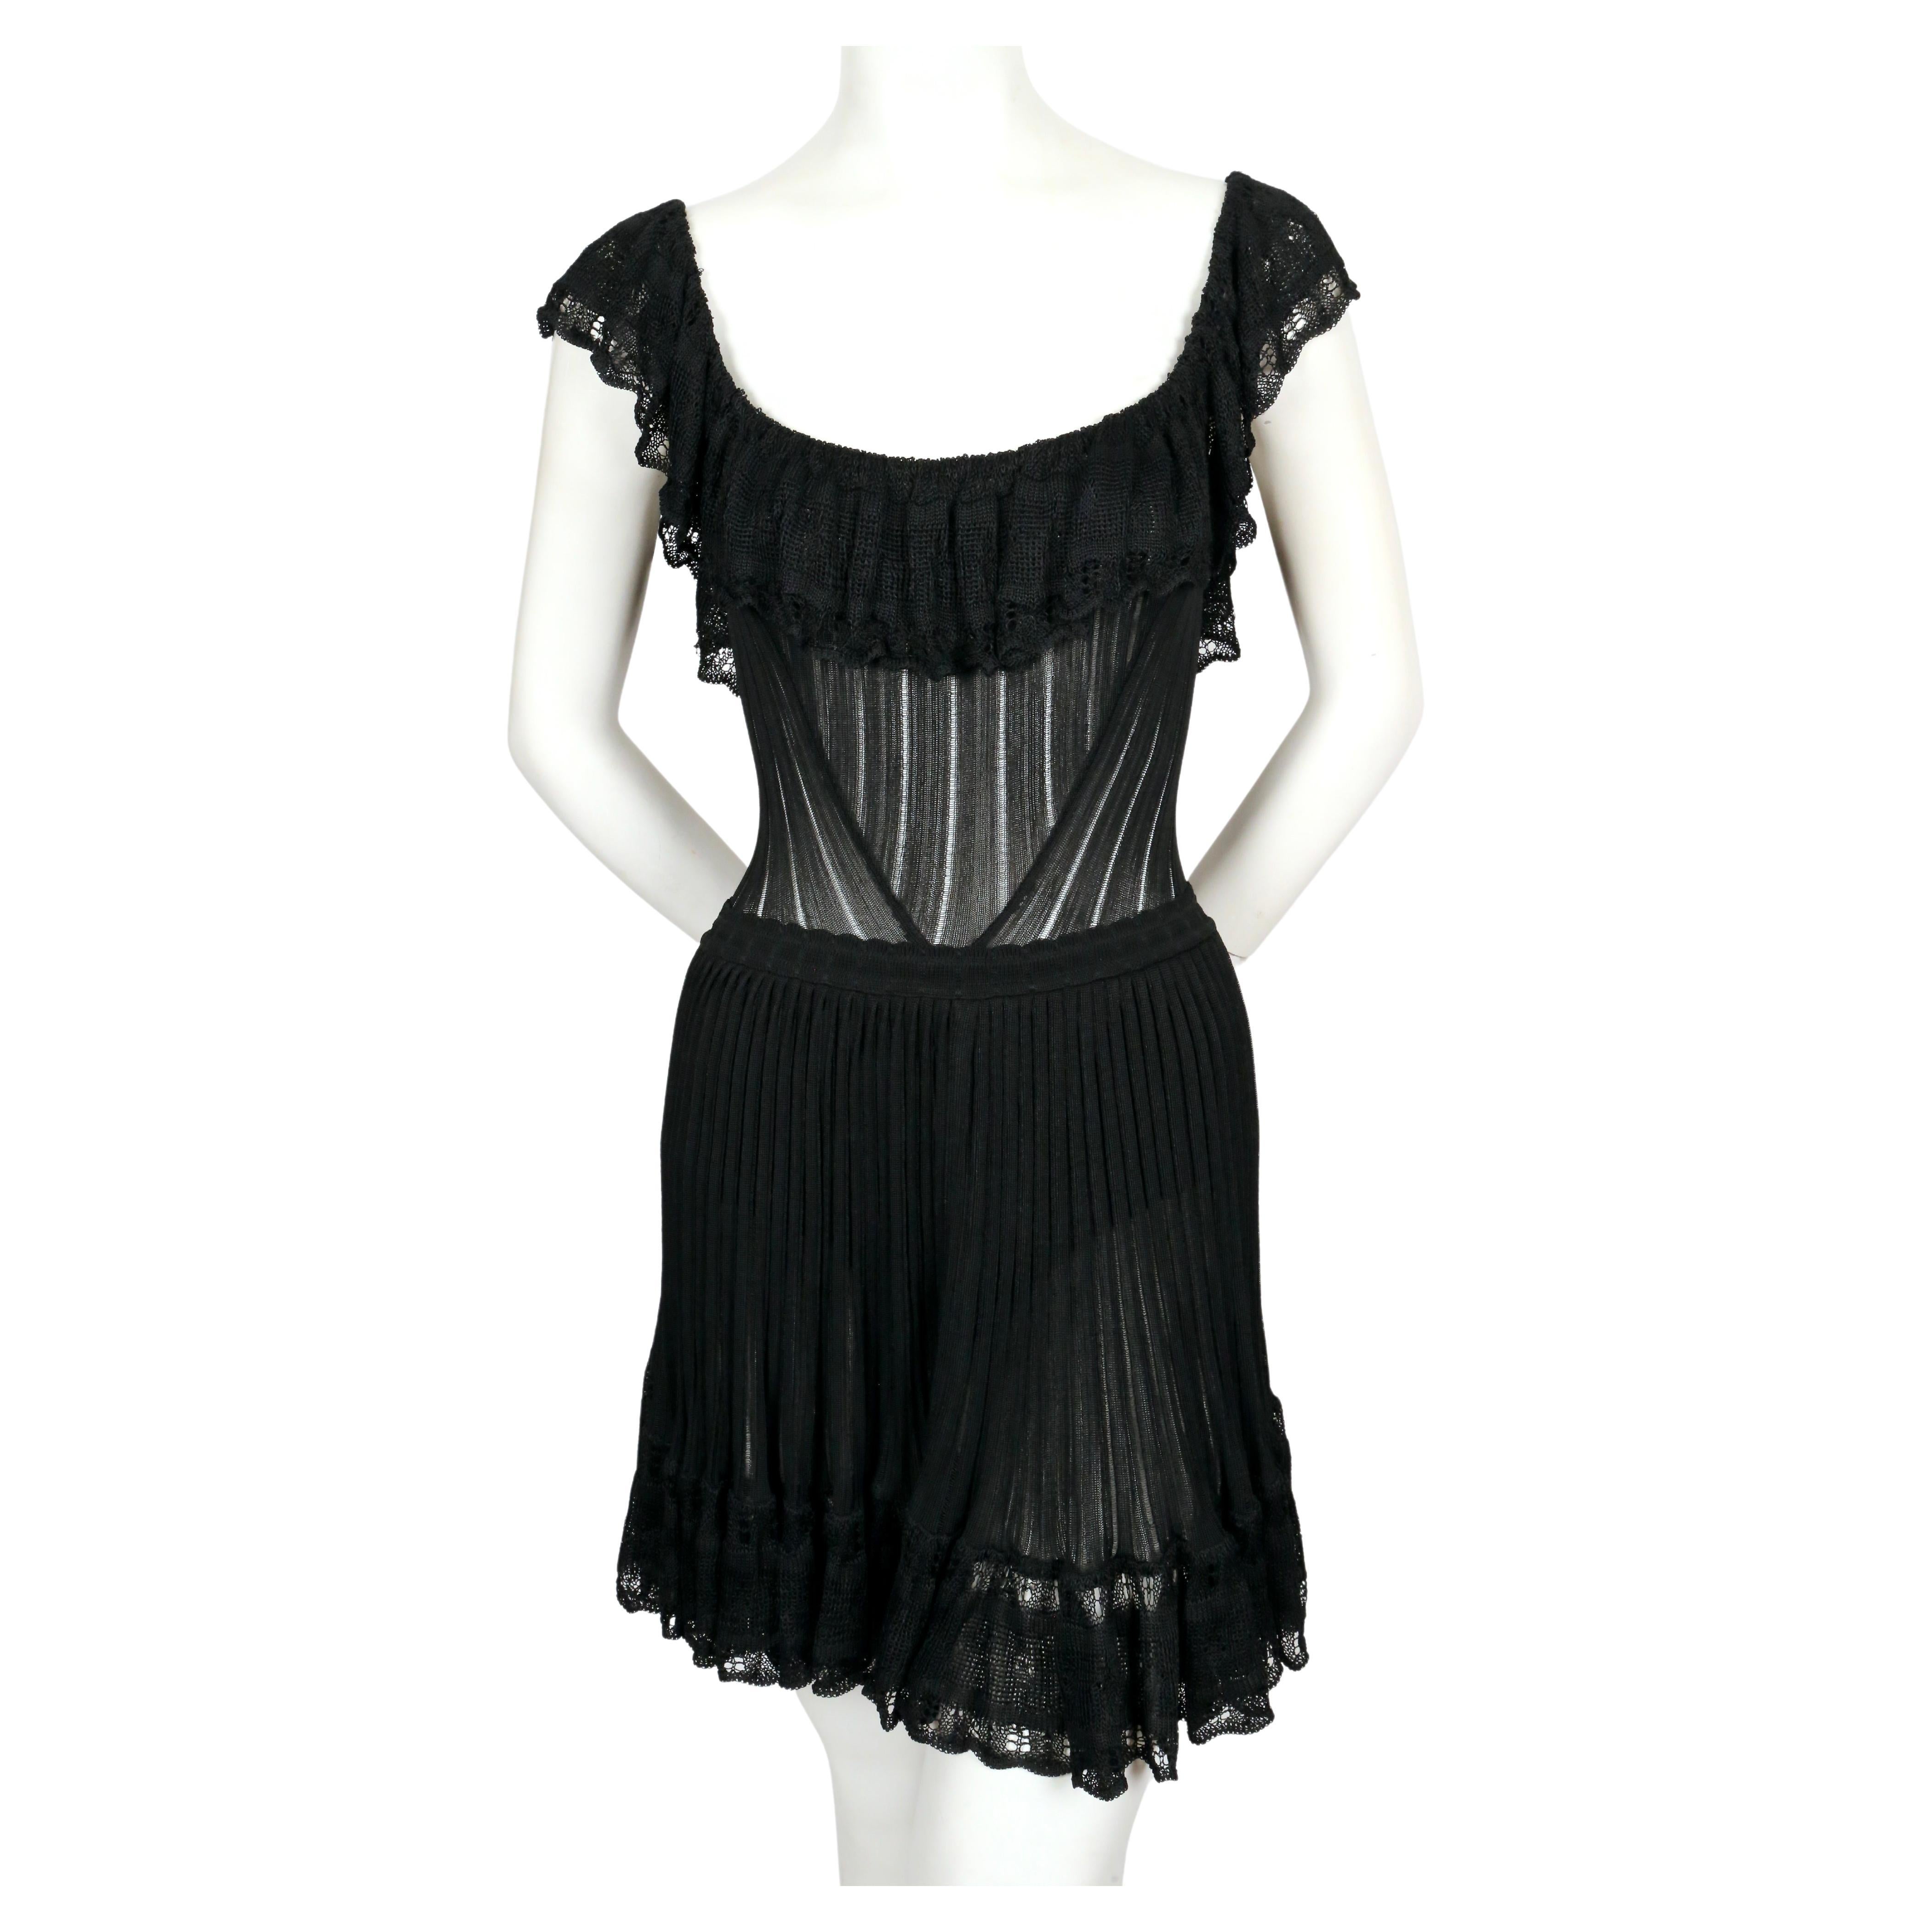 Very rare, jet-black semi-sheer dress with flounced pointelle trim and bustle back designed by Azzedine Alaia dating to the summer of 1992 exactly as seen on the runway. Dress is cleverly designed so that the flounce covers the bust along with built